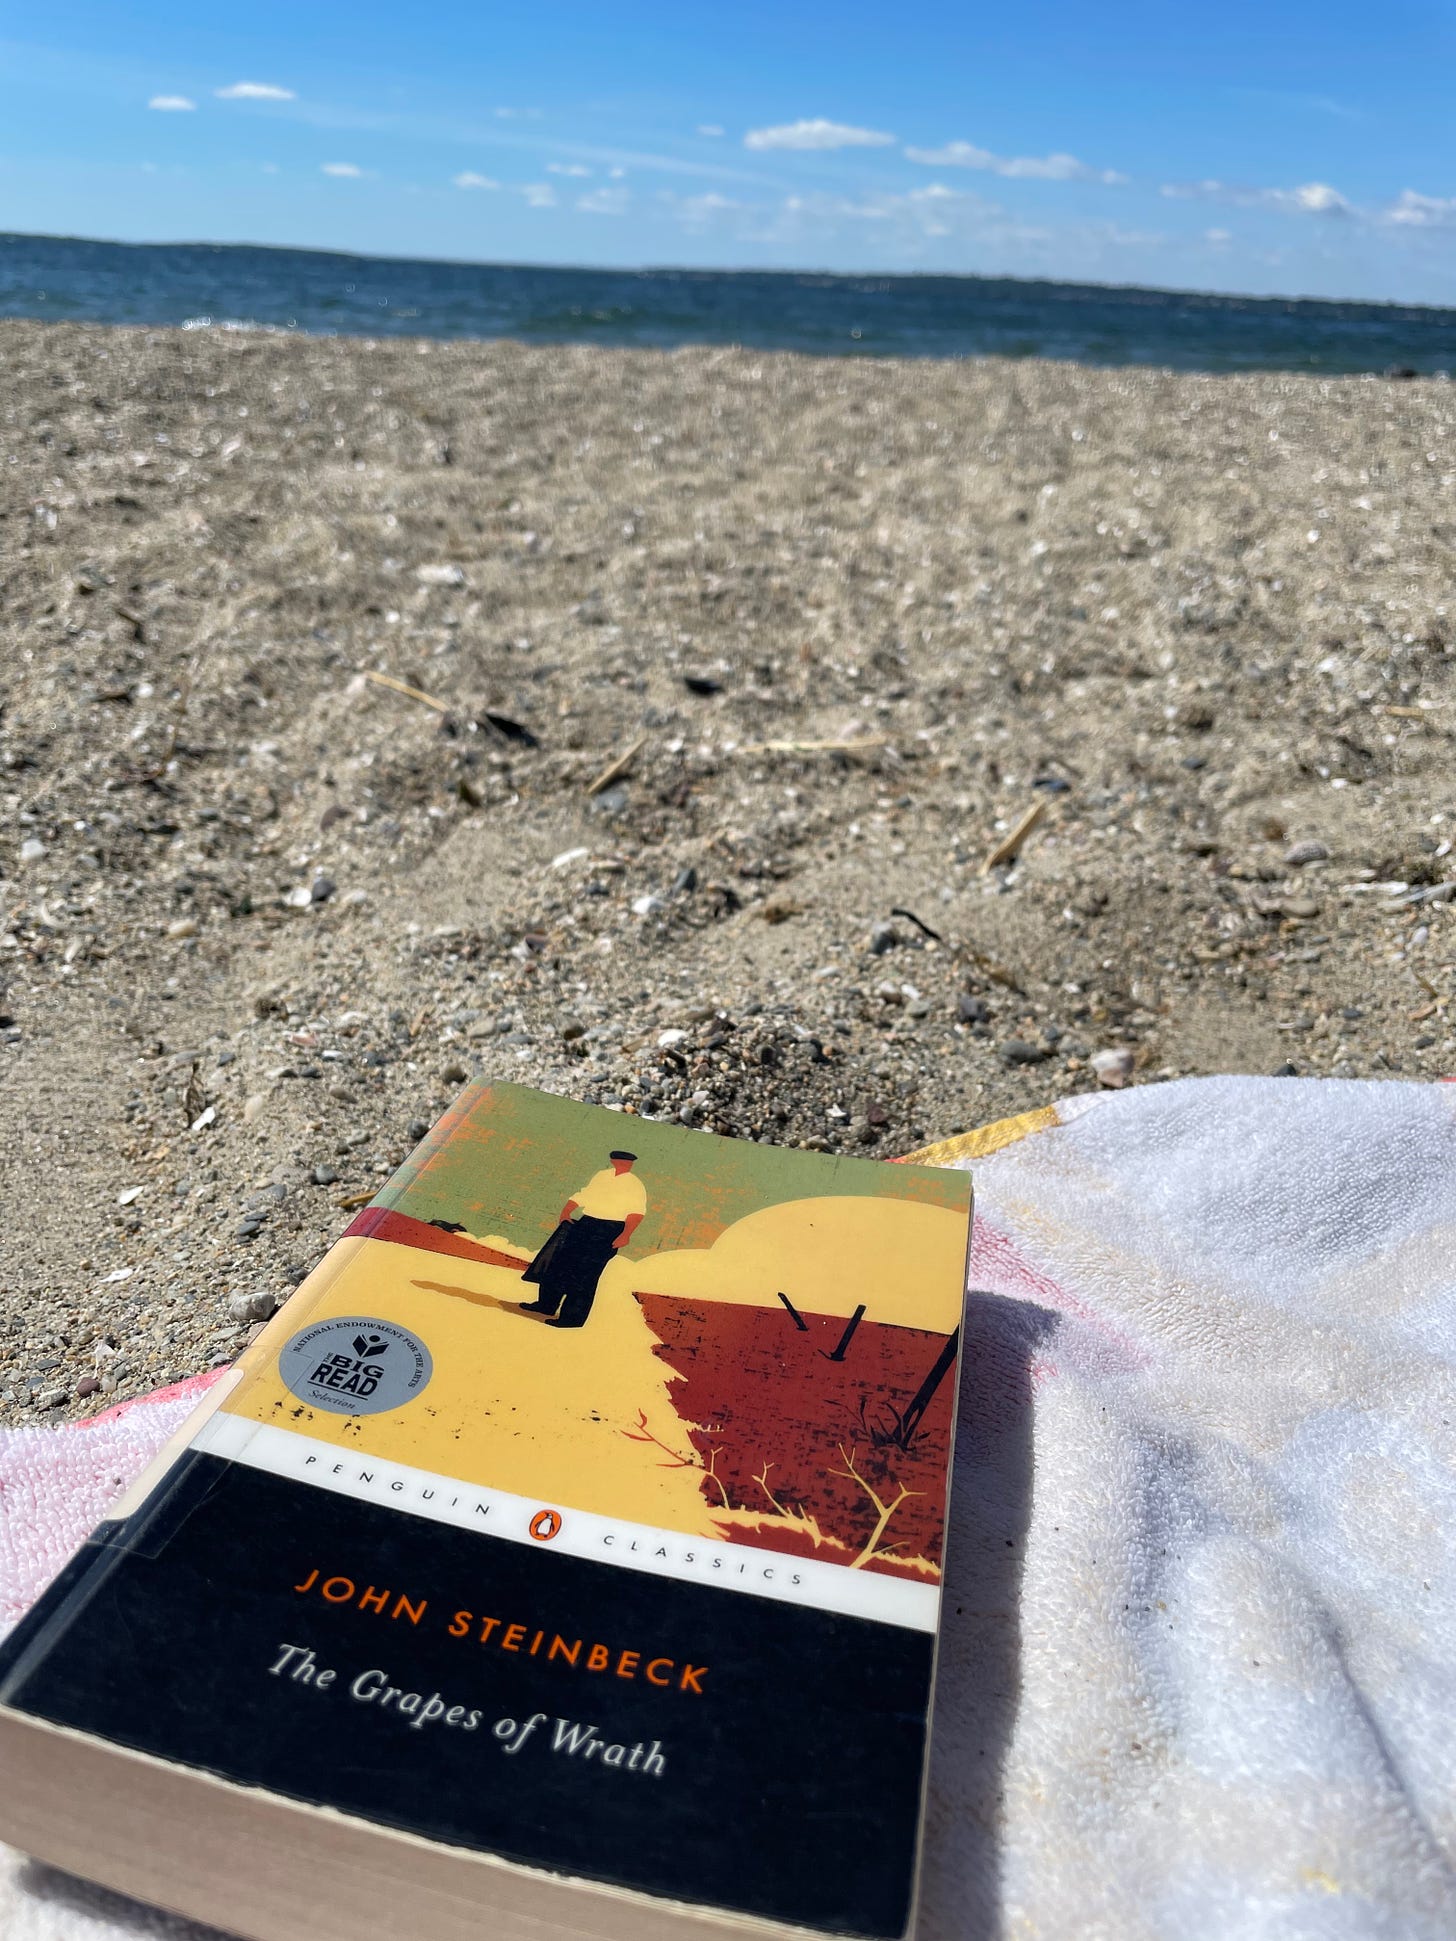 A book "The Grapes of Wrath" sits on a white towel on a sandy, rocky beach. In the distance, the blue ocean meets the horizon of a blue sky.